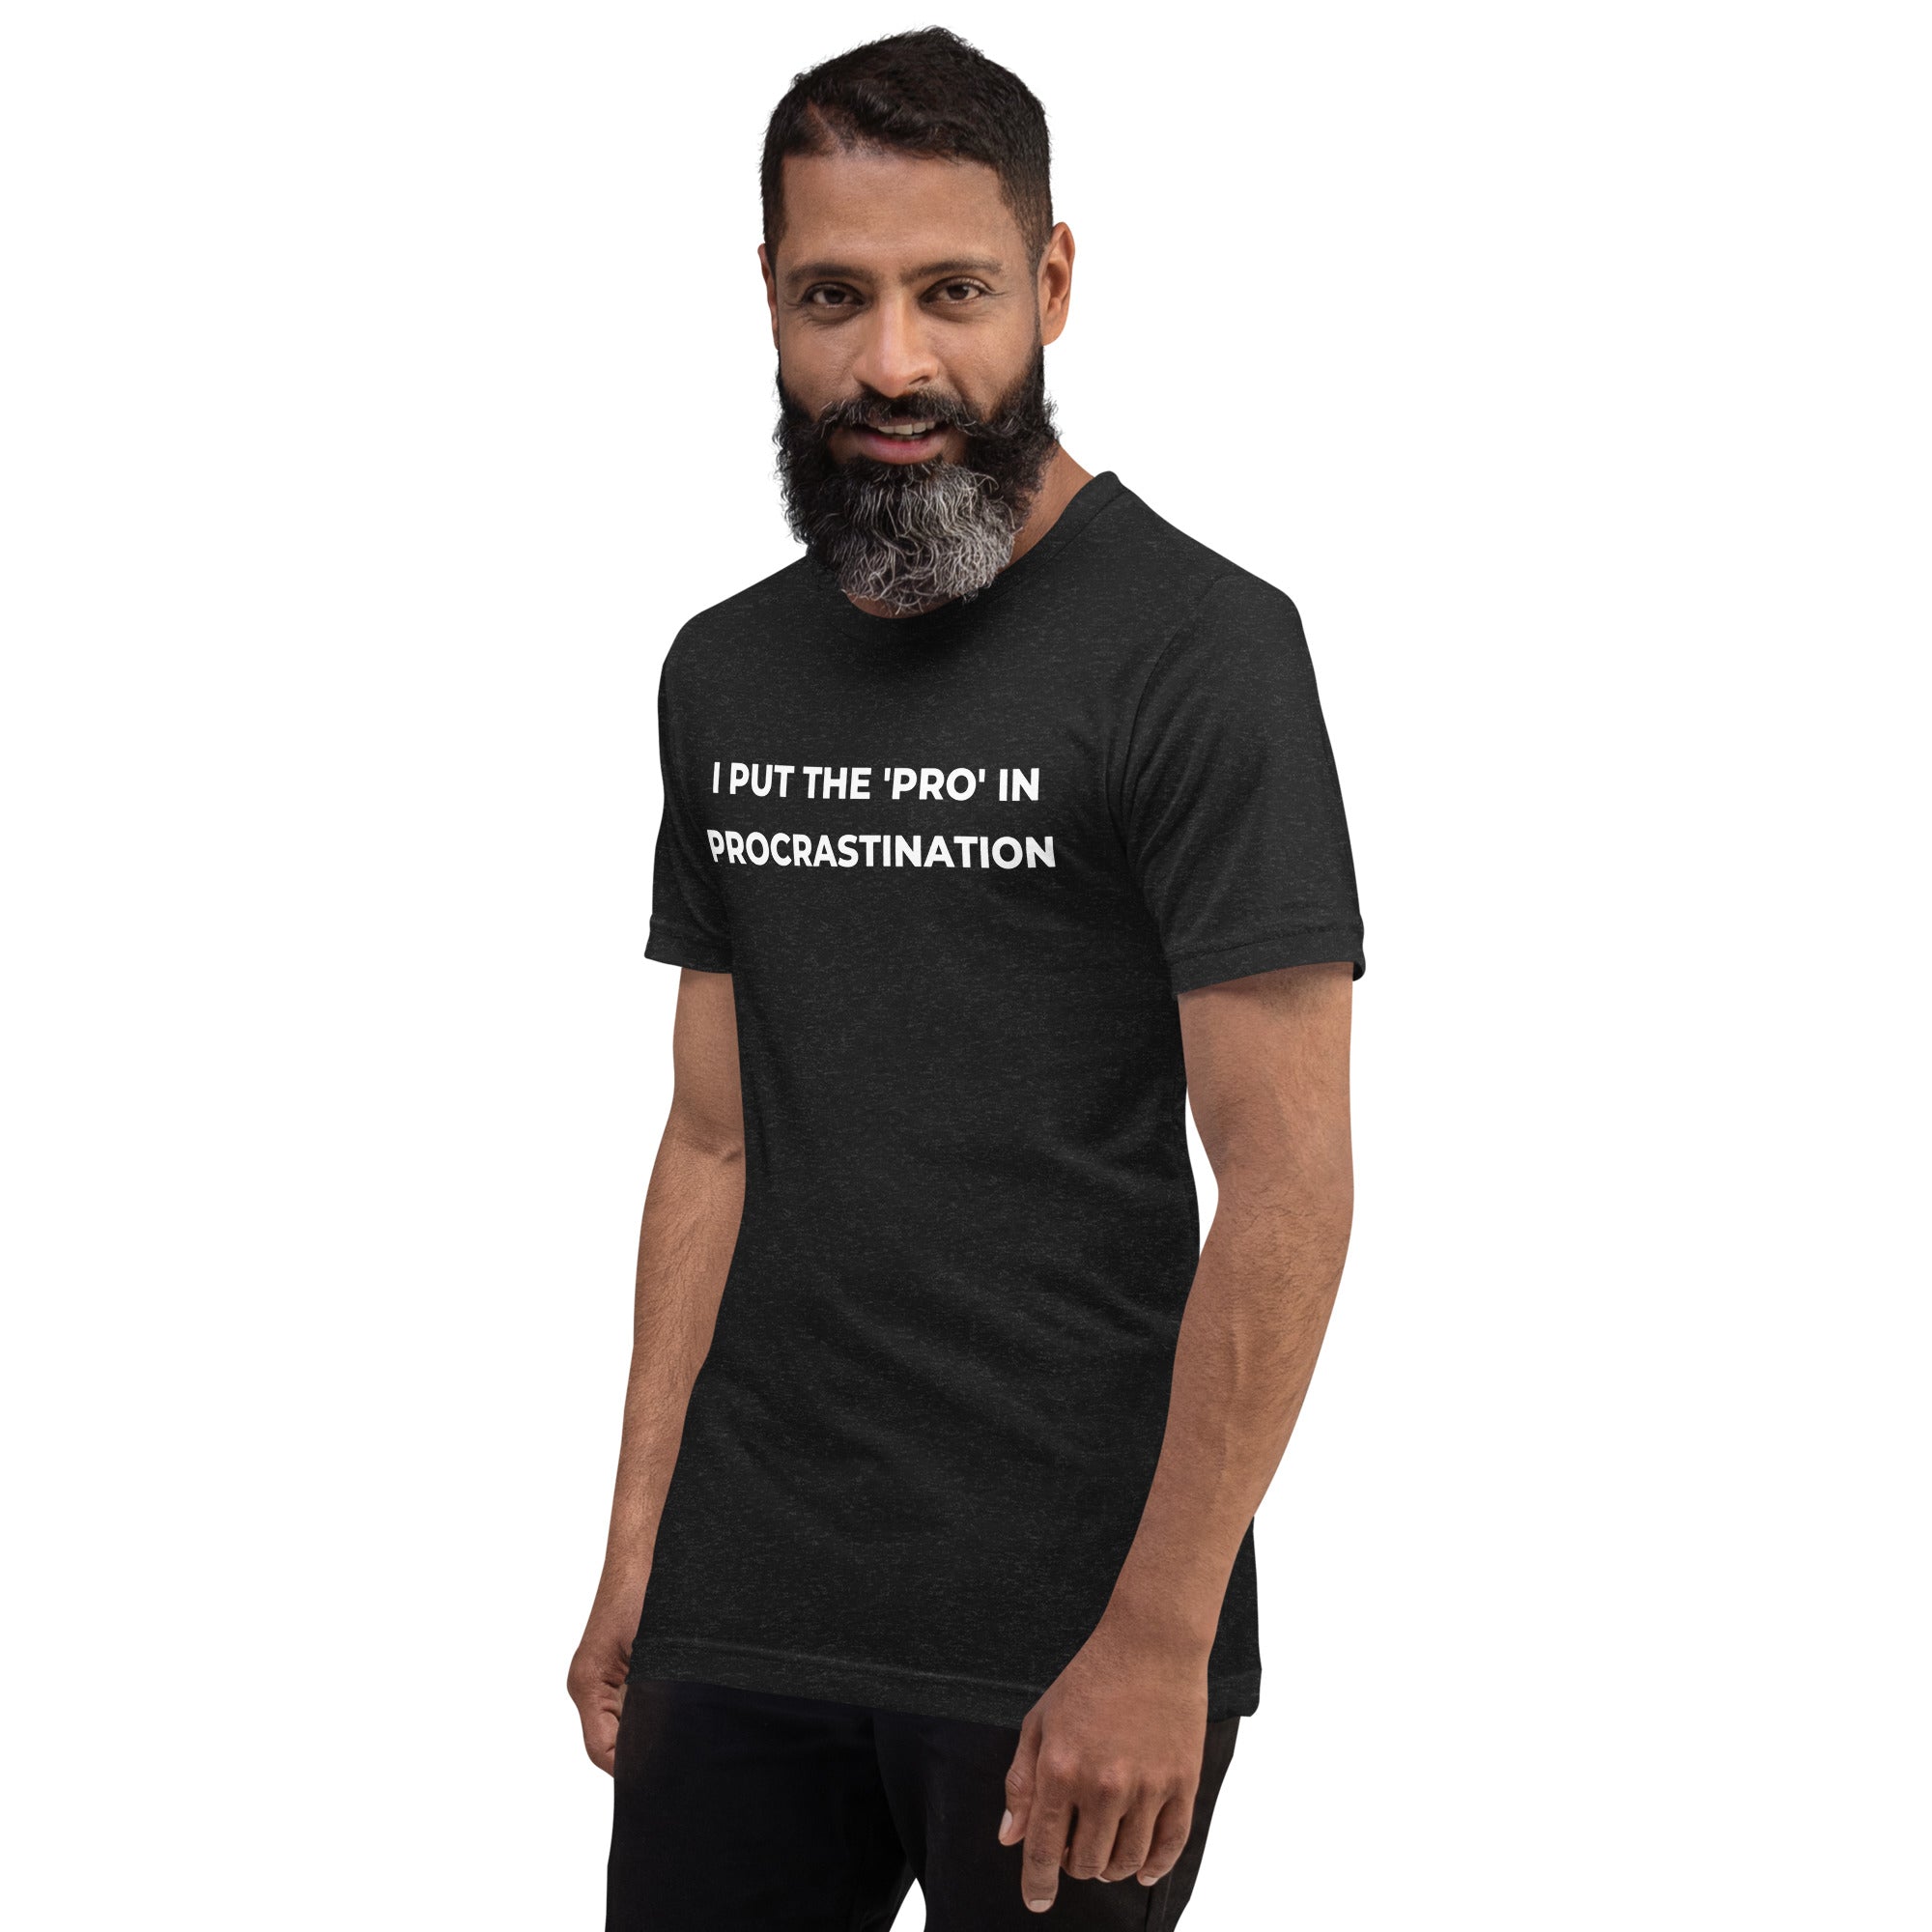 I Put The 'Pro' in Procrastination, Funny Procrastination Shirt, Sarcastic Saying Tee, Lazy T-Shirt for Men and Women - PennyJellies